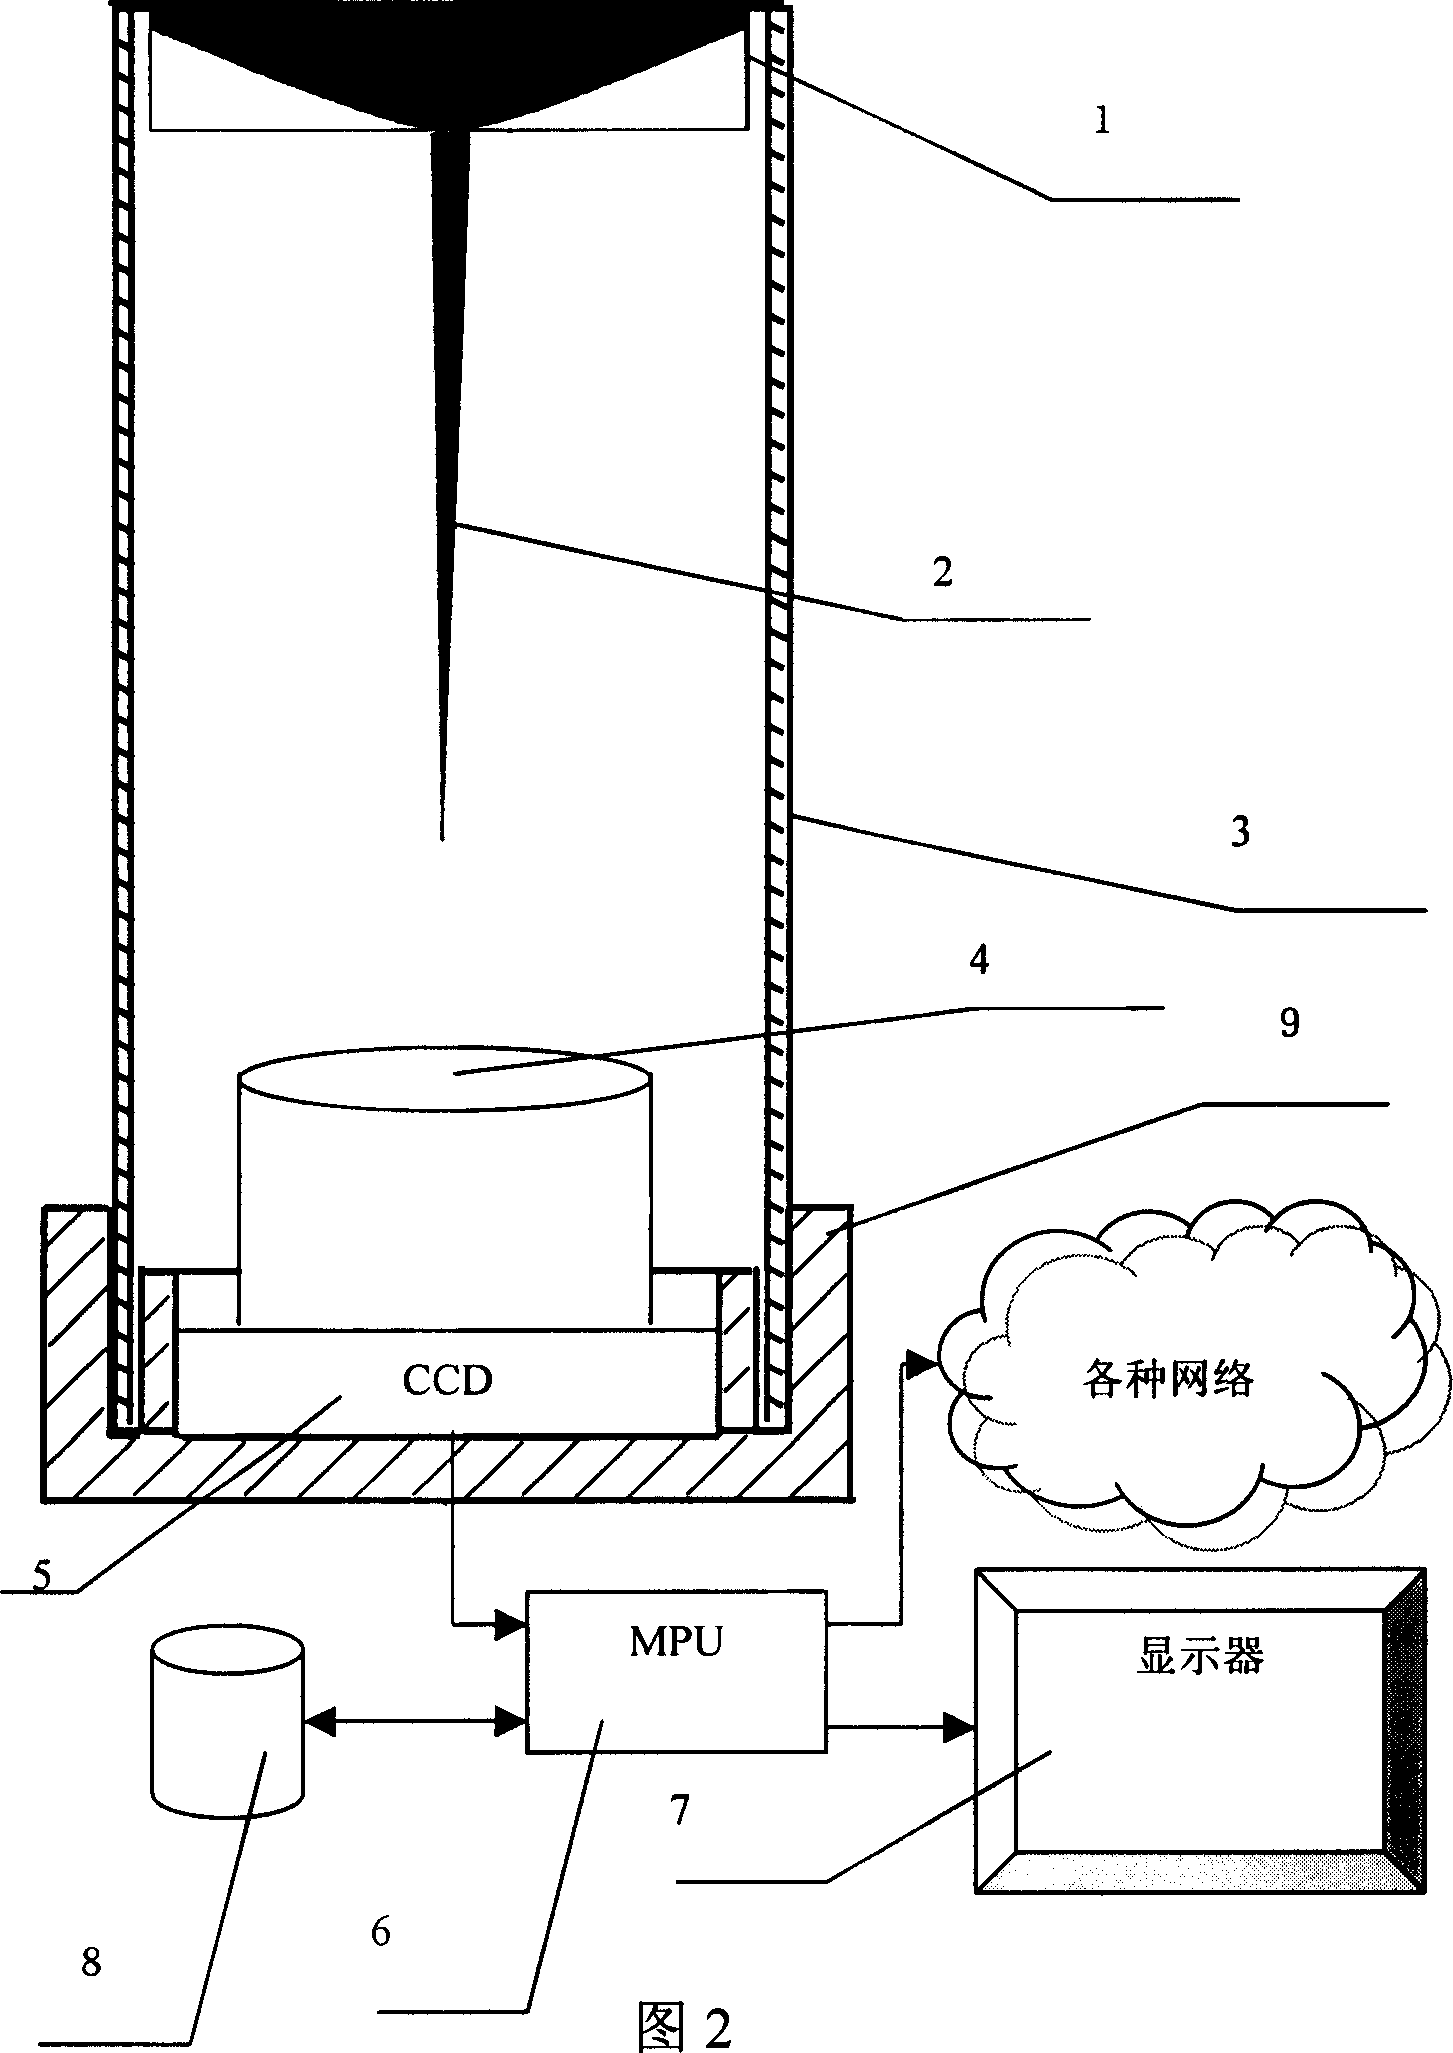 Central air conditioner energy-saving control device based on omnibearing computer vision